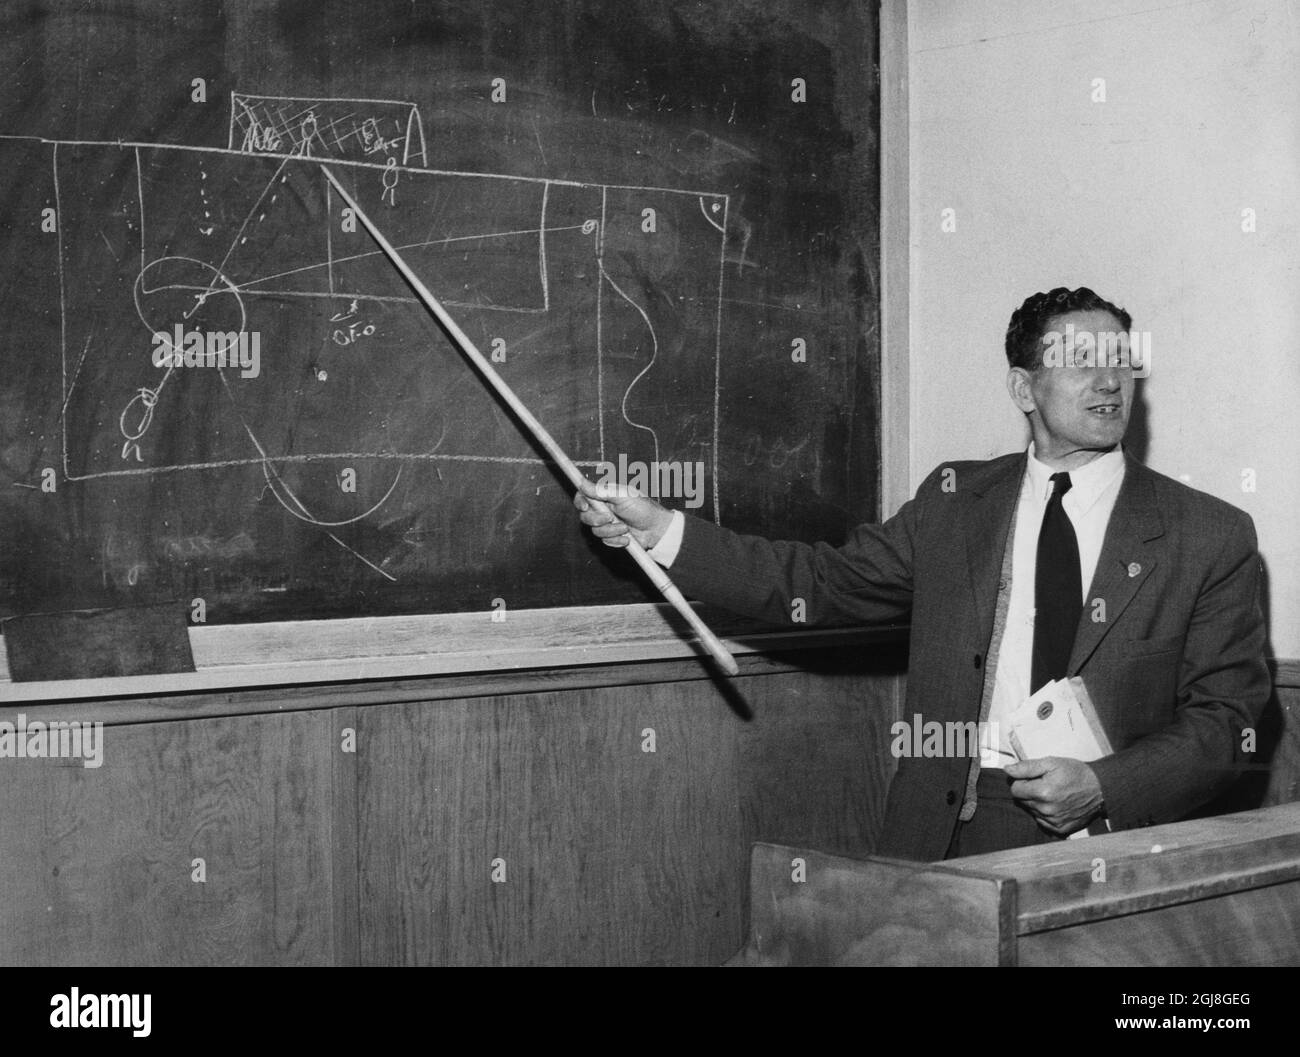 STOCKHOLM 1957-06-06 George Raynor pa Lillsved. National team coach George Raynor explains football tactics on the blackboard at Lillsveds education center outside Stockholm. George Raynor (1907-1985), English footballer and manager. He was the coach of Sweden's national football team during the 1940 - and 1950's. He led them to Olympic gold in 1948 and Olympic bronze 1952. In the World Cup, he managed to take Sweden to a bronze in 1950 and silver 1958. Foto: Tore Falk / EXPRESSEN / SCANPIX kod 1048 ** Aftonbladet OUT**  Stock Photo